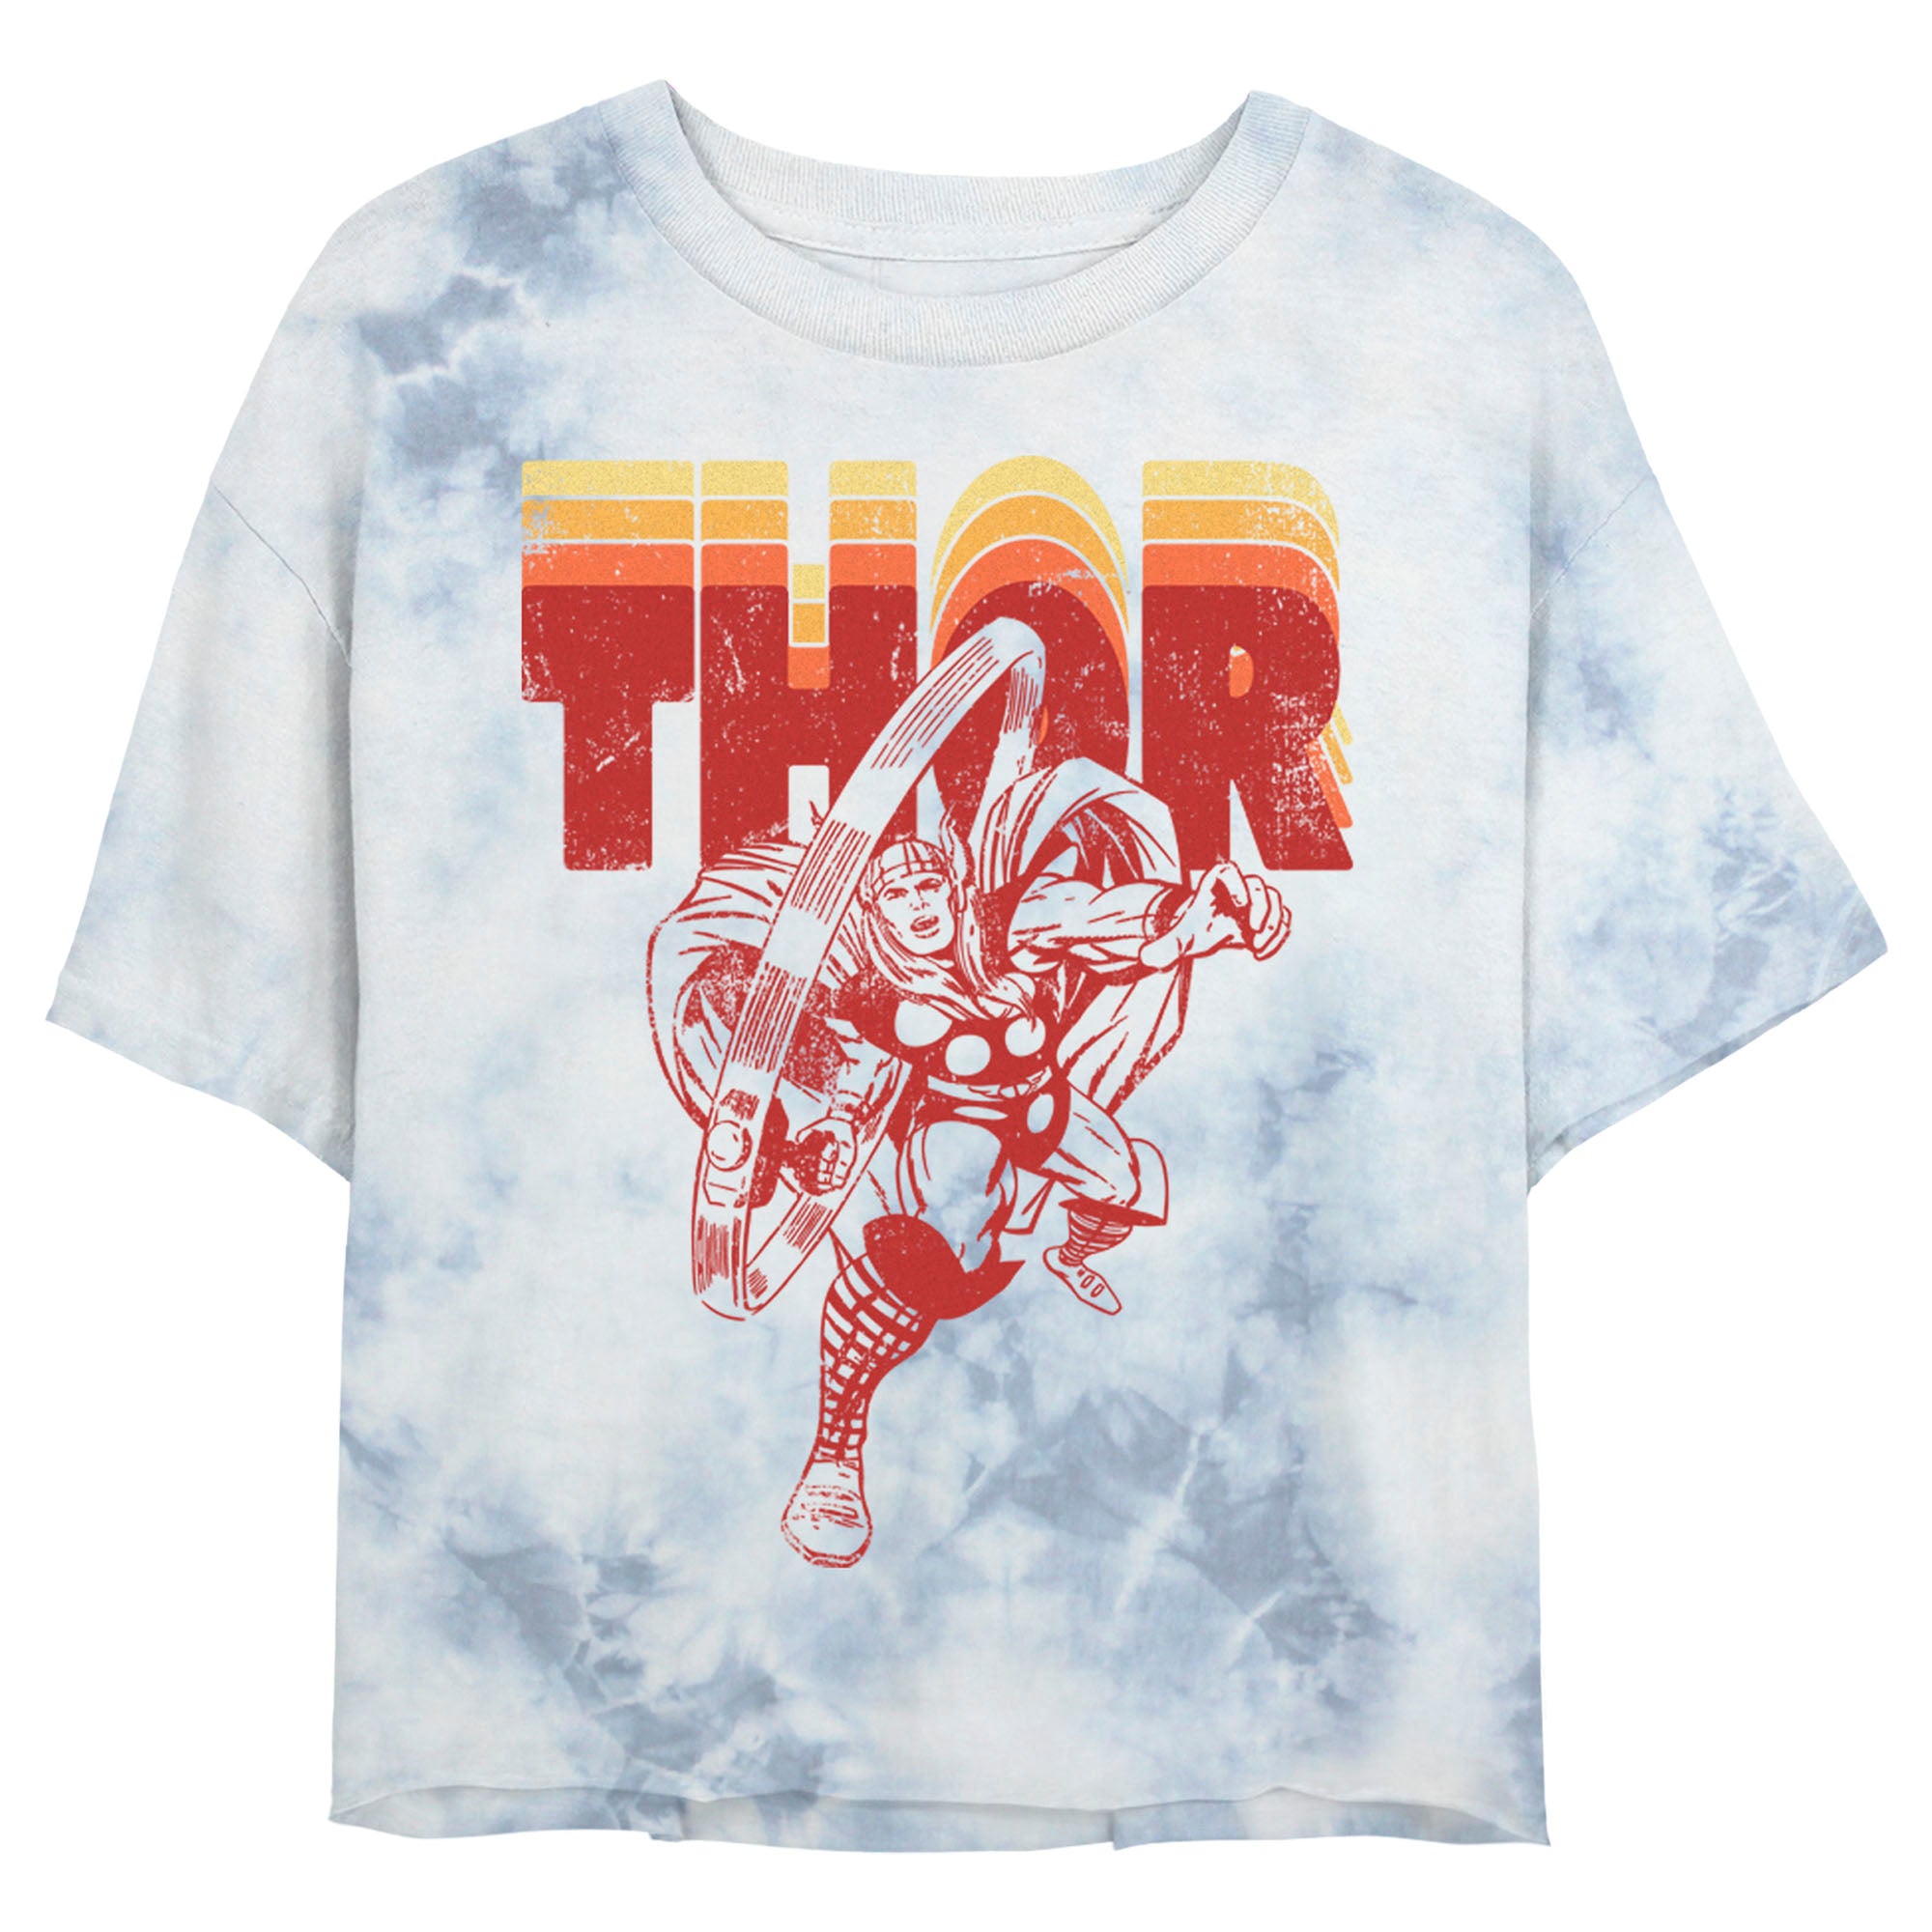 Join the Avengers: Merch Box Today Mouse Kids Apparel Shop Line Marvel Our The –